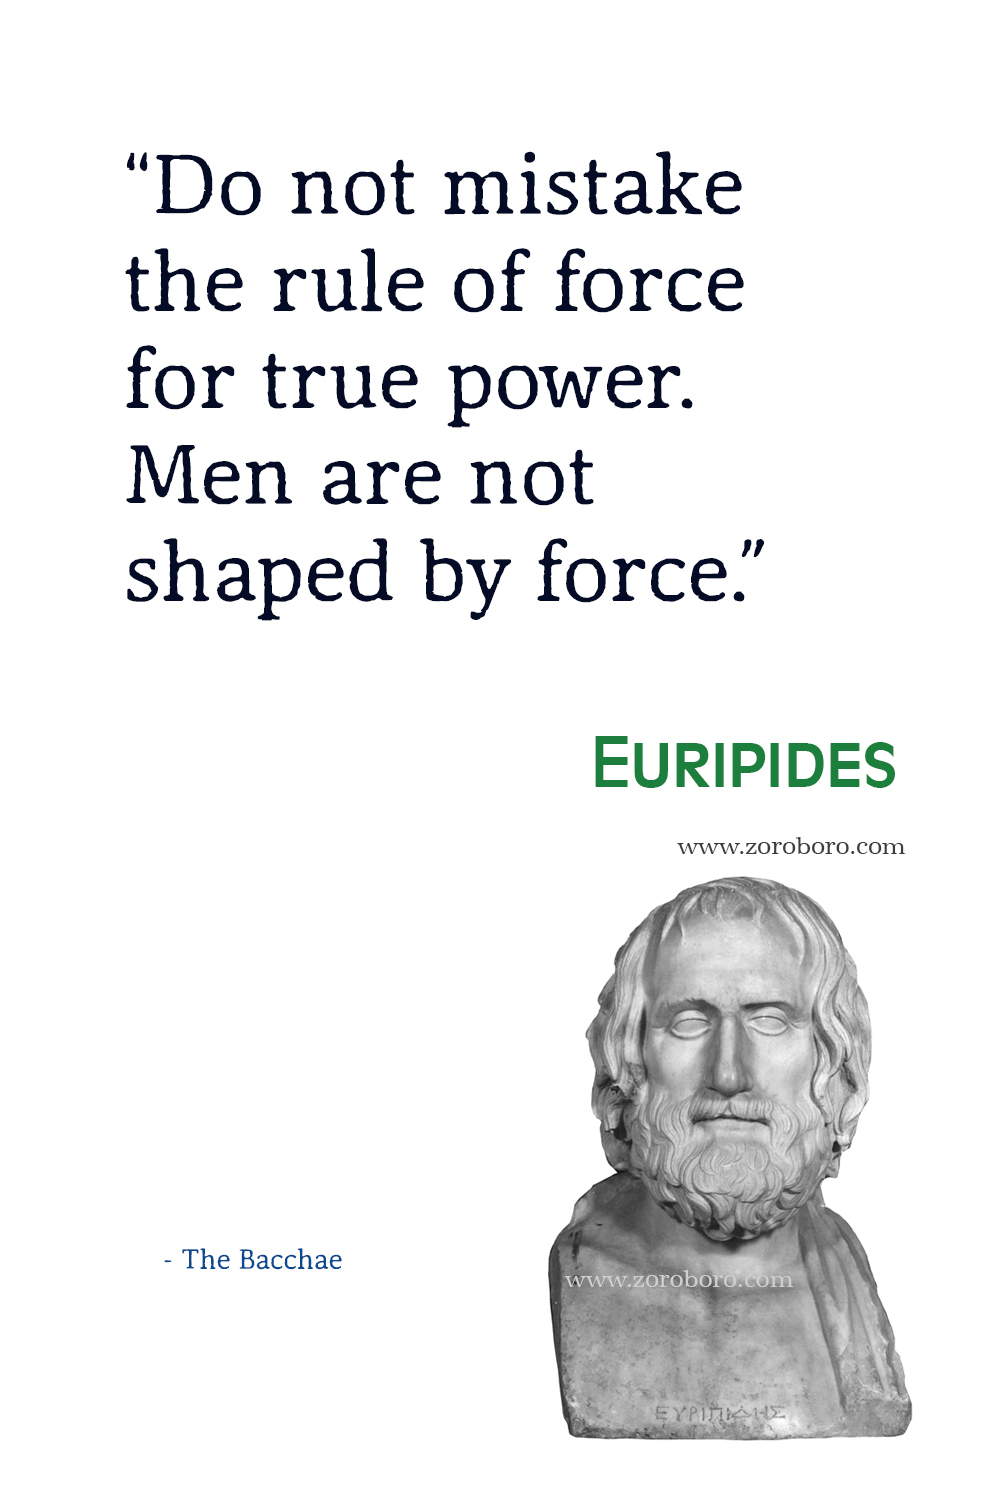 Euripides Quotes, Euripides Freedom, Liberty, Speak Quotes, Euripides Medea Quotes, Euripides Philosophy, Euripides The Bacchae Quotes